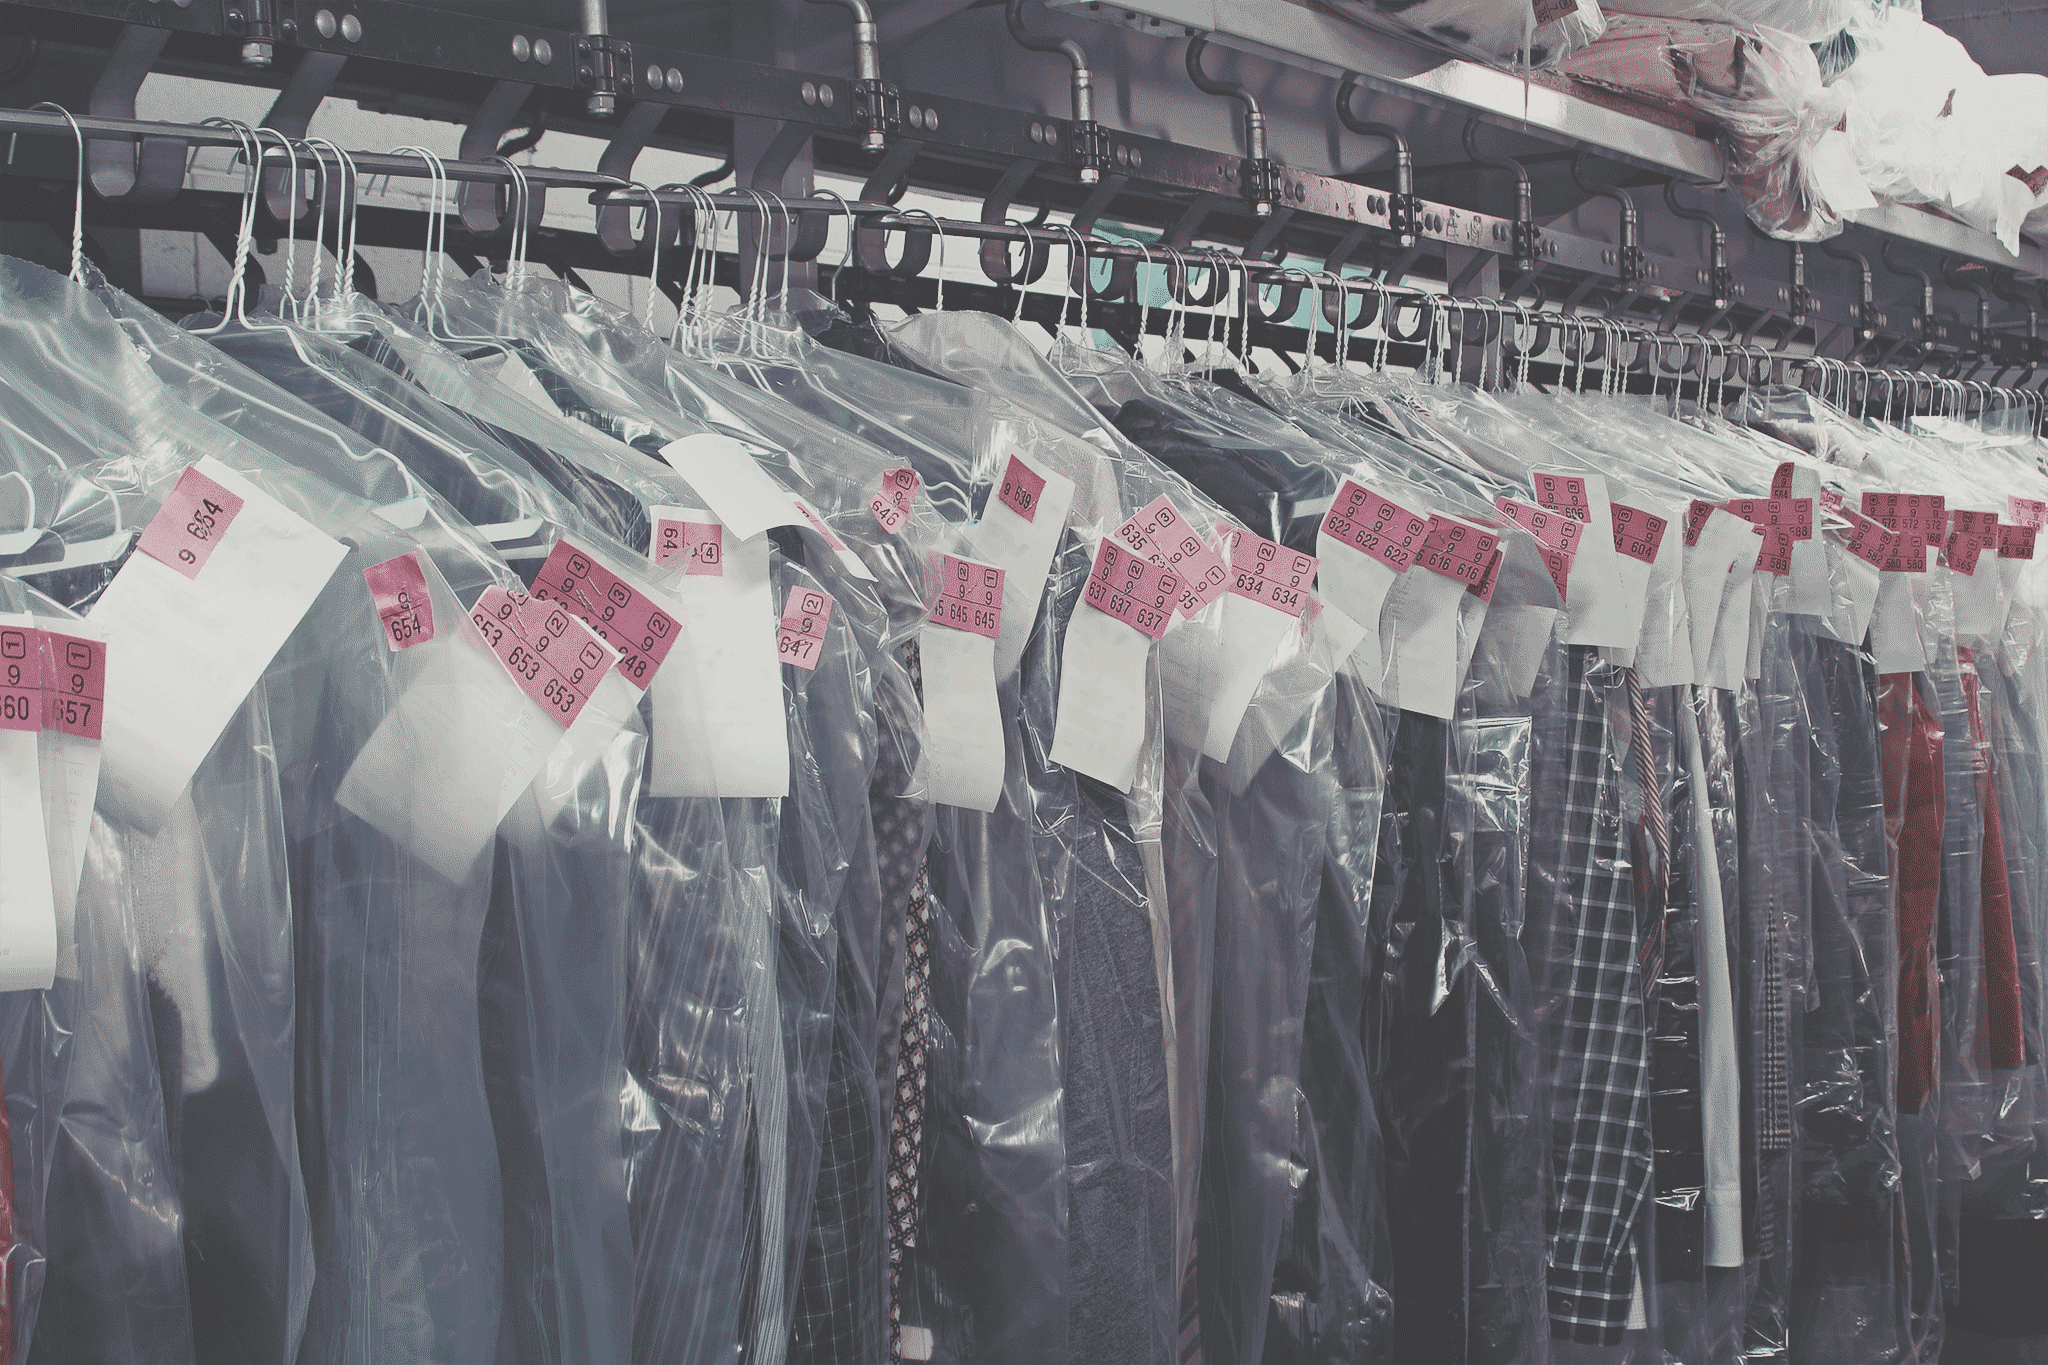 Dry cleaners are among the cleaning industries served by AristoCraft.